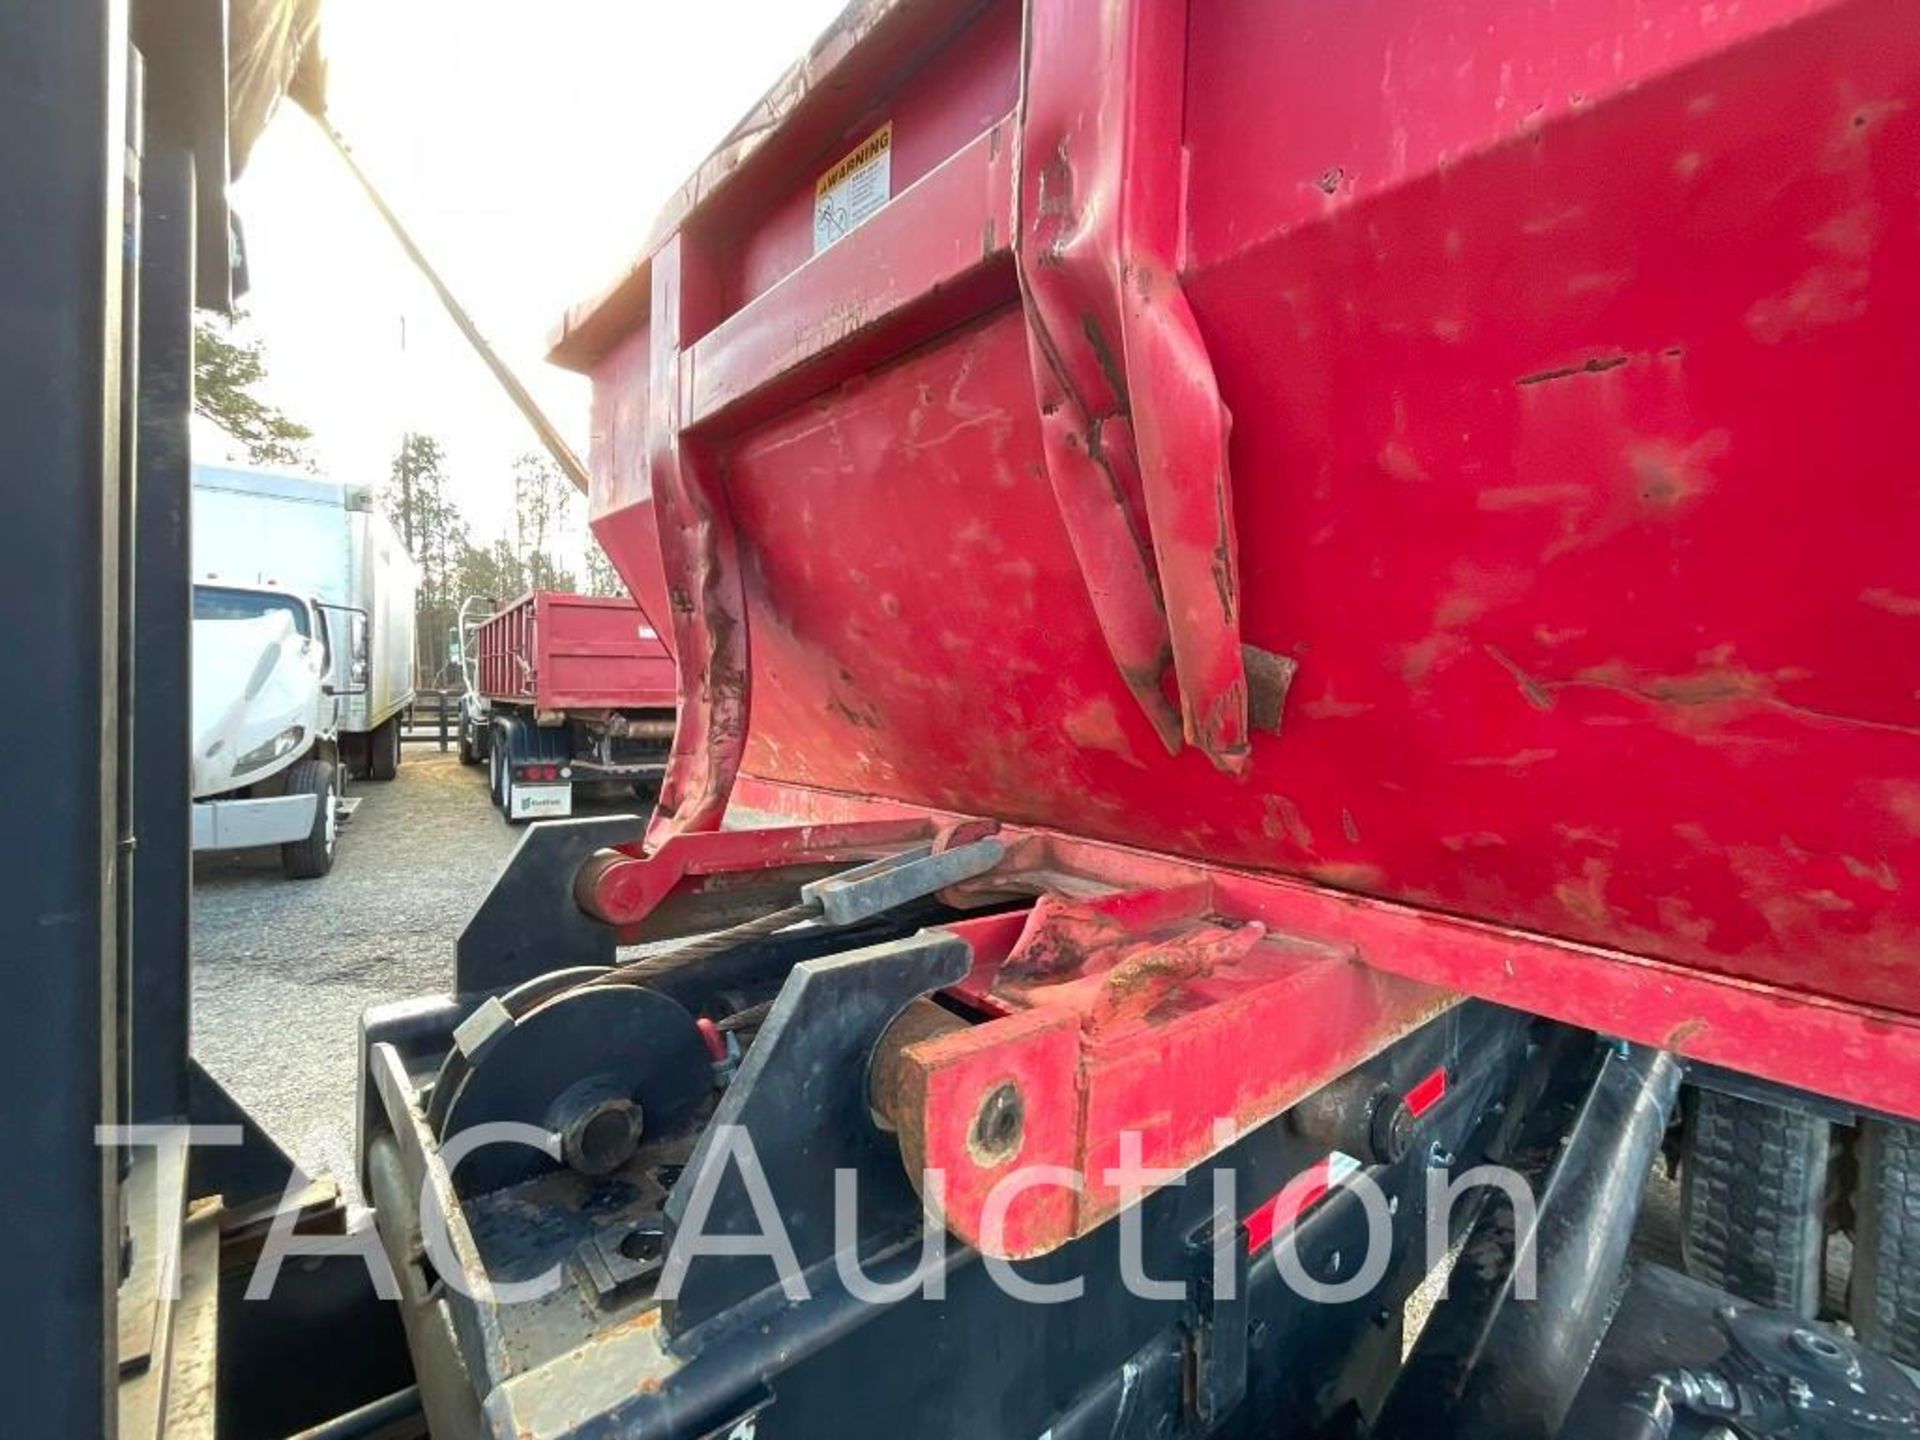 2012 CAT CT660S Roll-Off Truck W/ 20yd Dumpster - Image 10 of 74